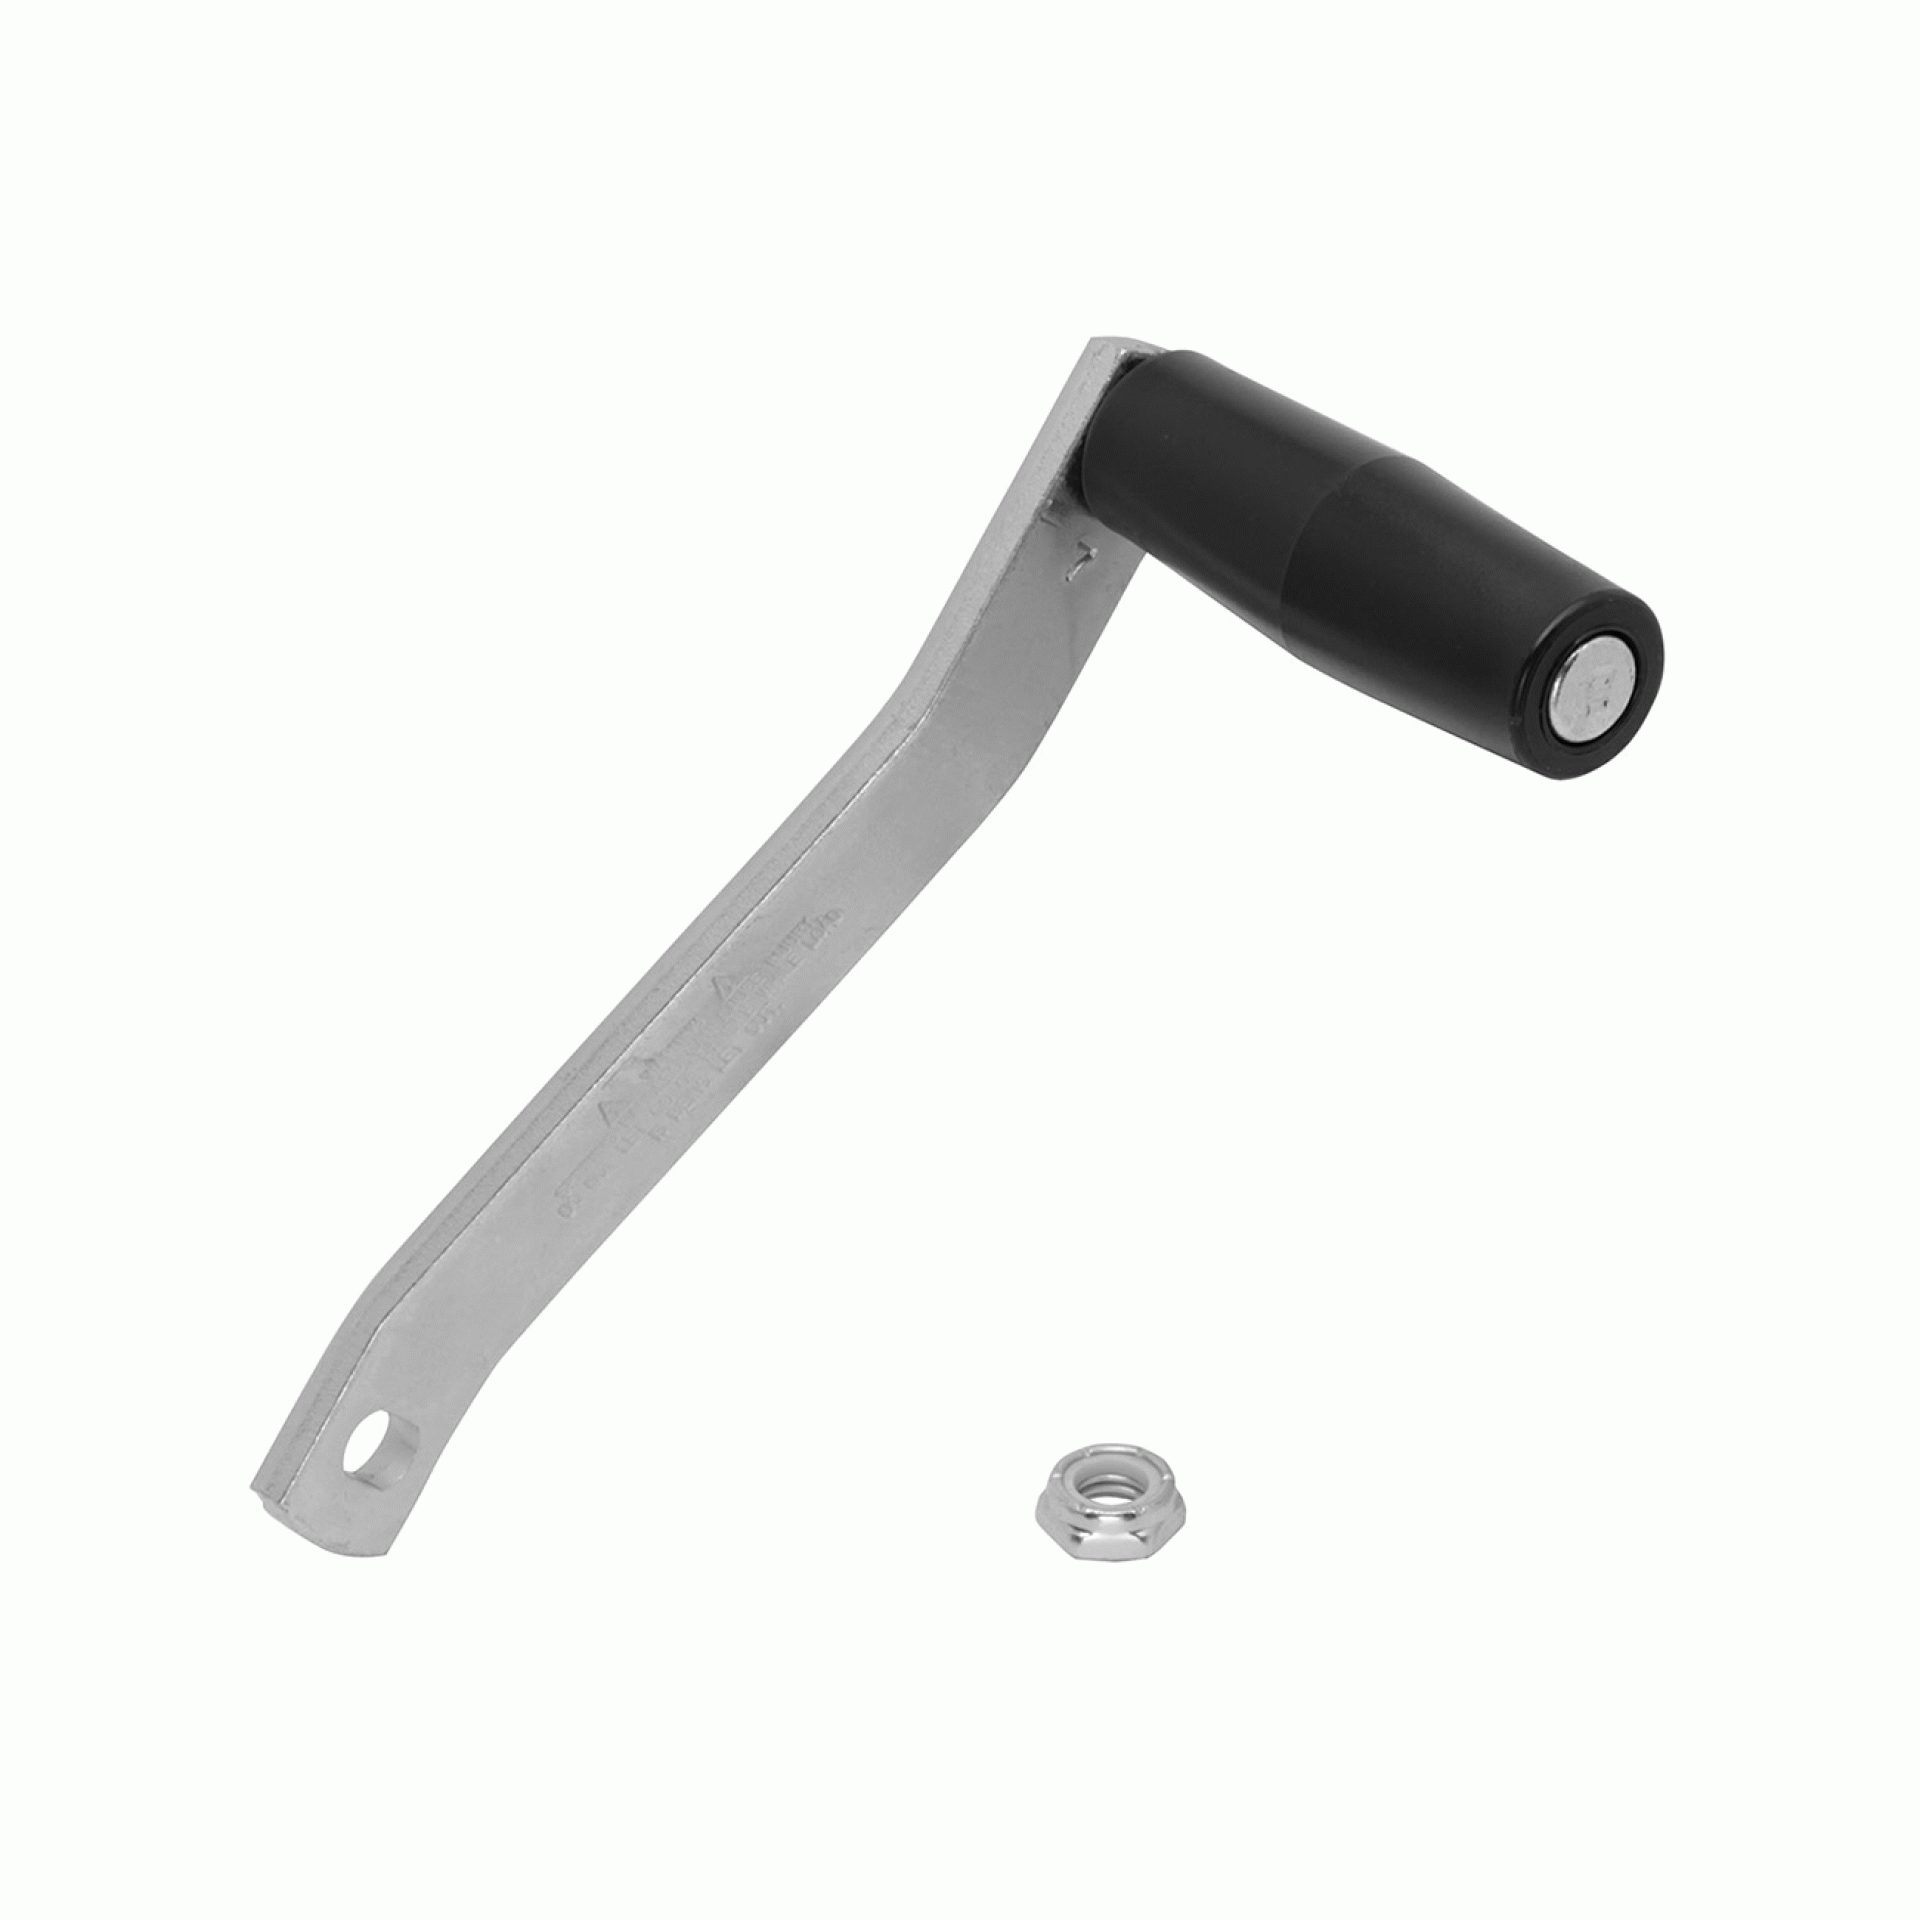 FULTON PERFORMANCE PRODUCTS | 501107 | Trailer Winch Handle - 7"